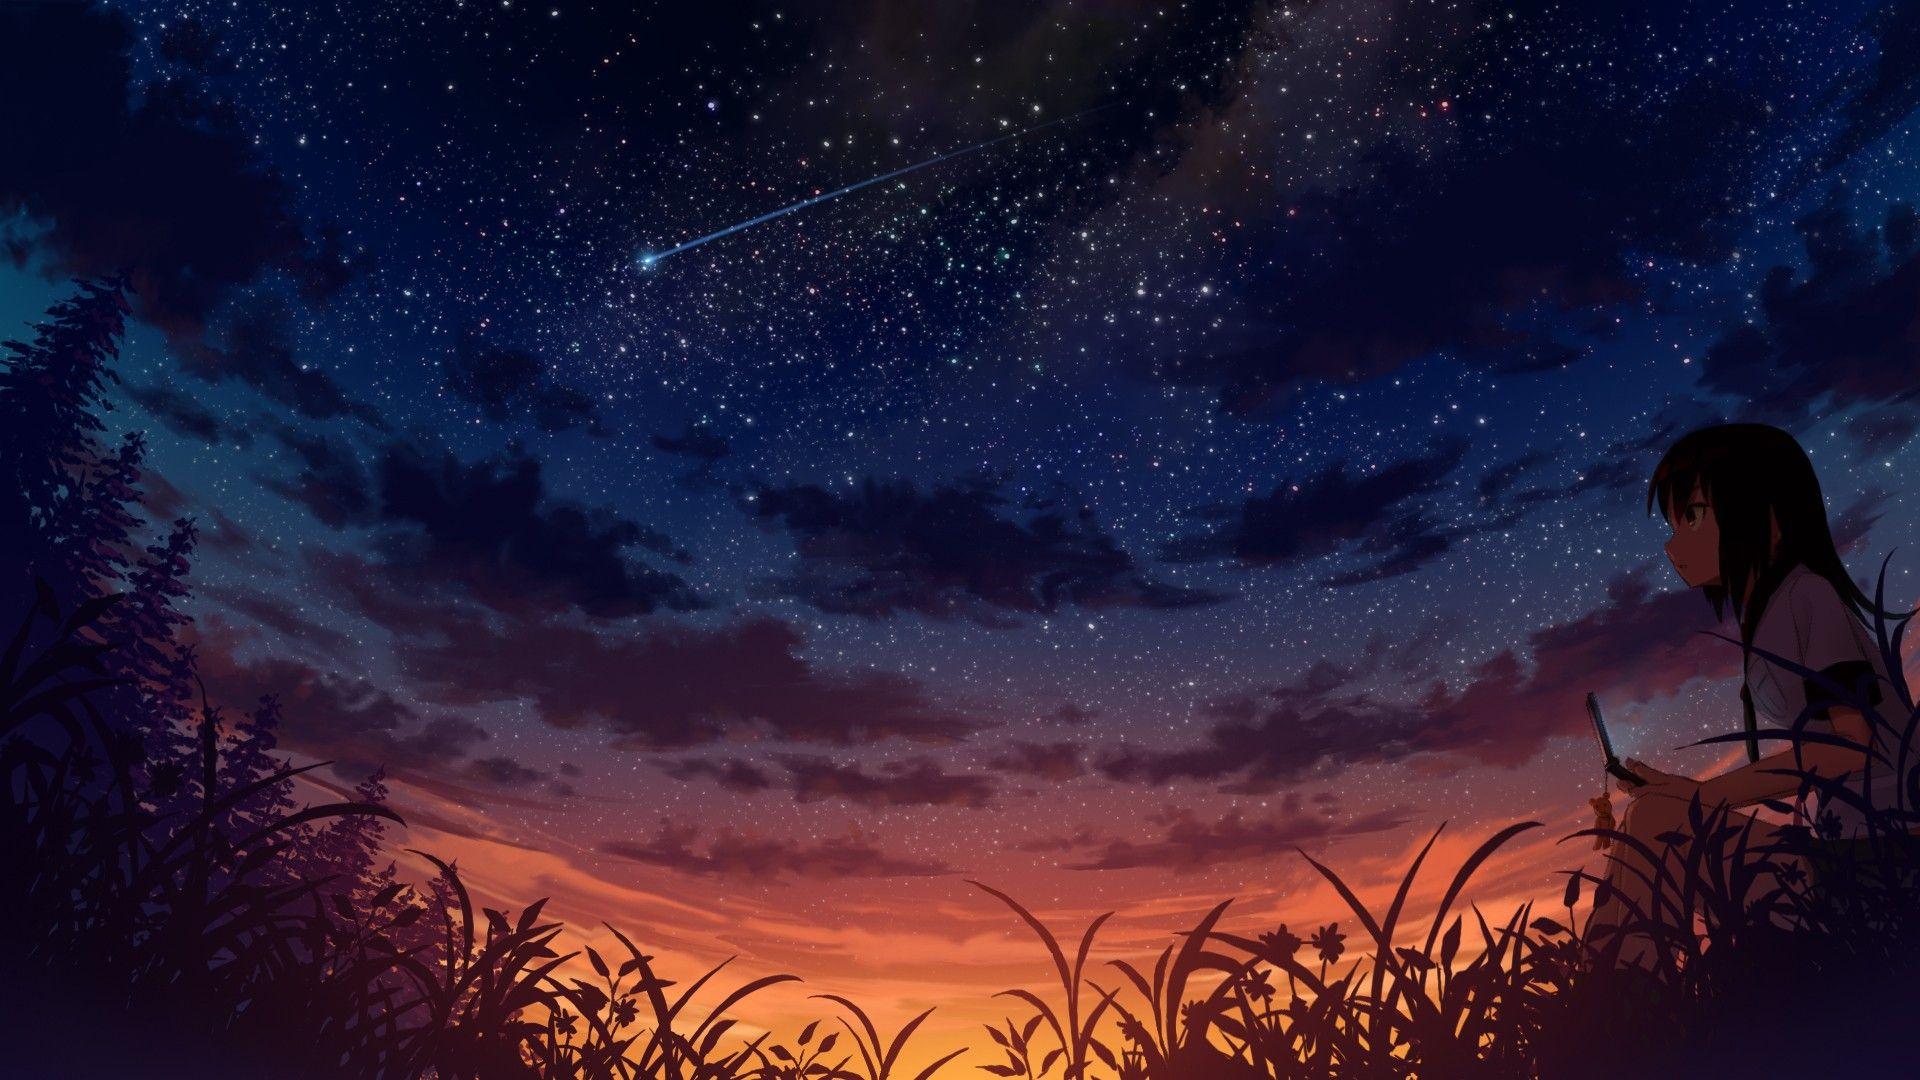 Download the Watching the Night Sky Wallpaper, Watching the Night